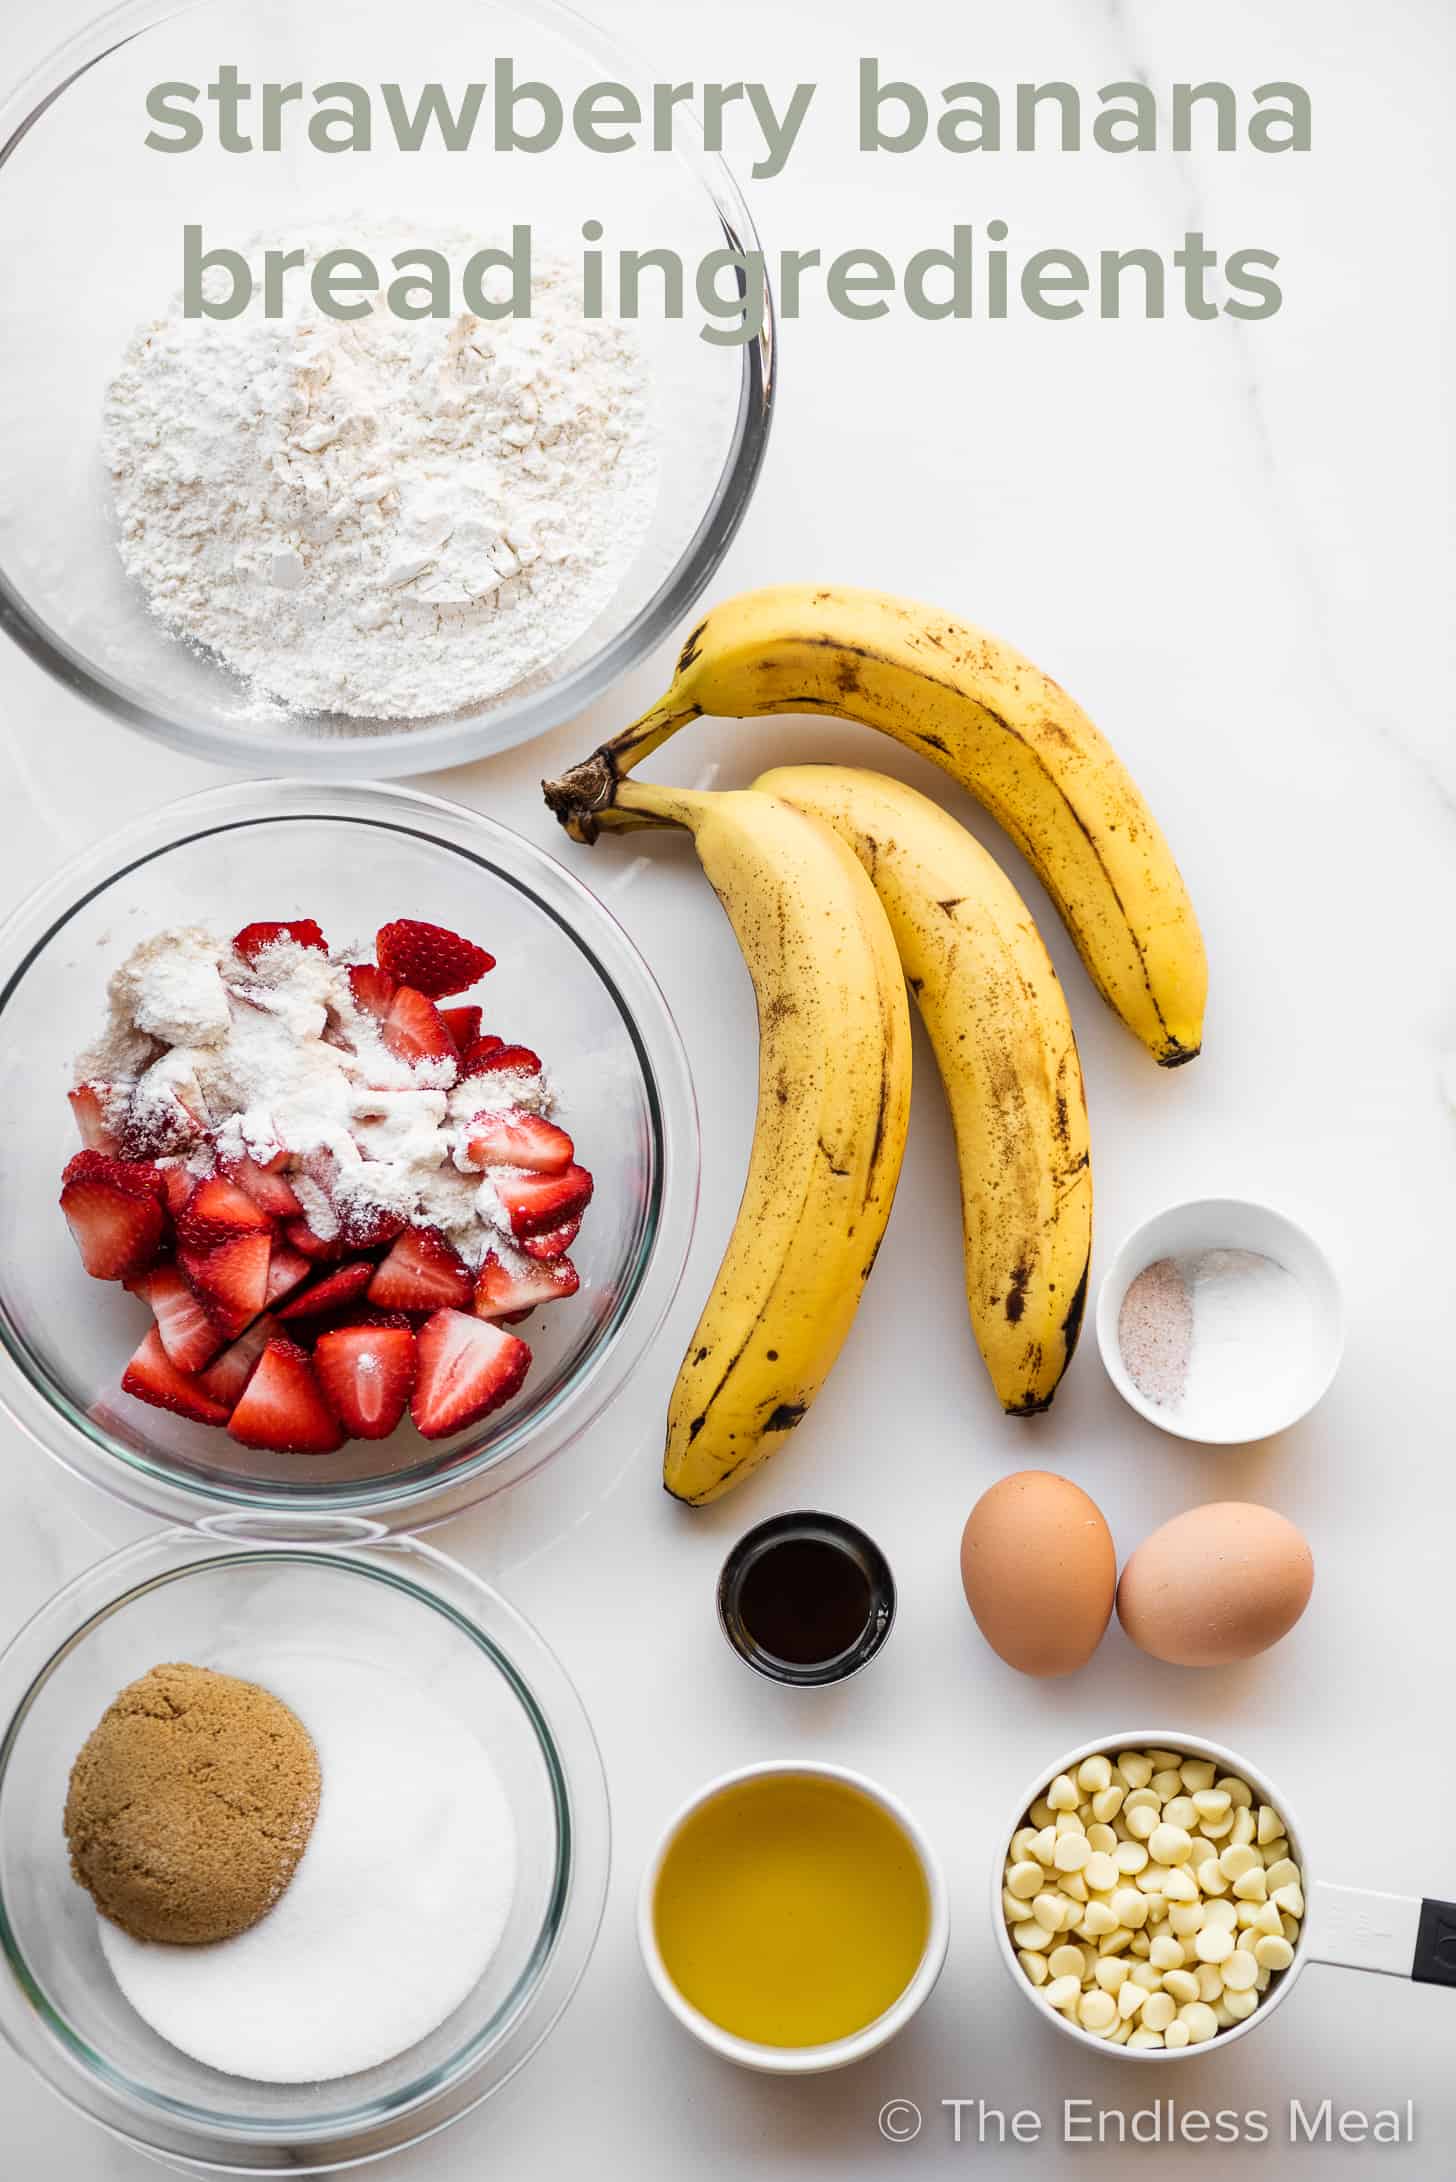 The ingredients to make strawberry banana bread